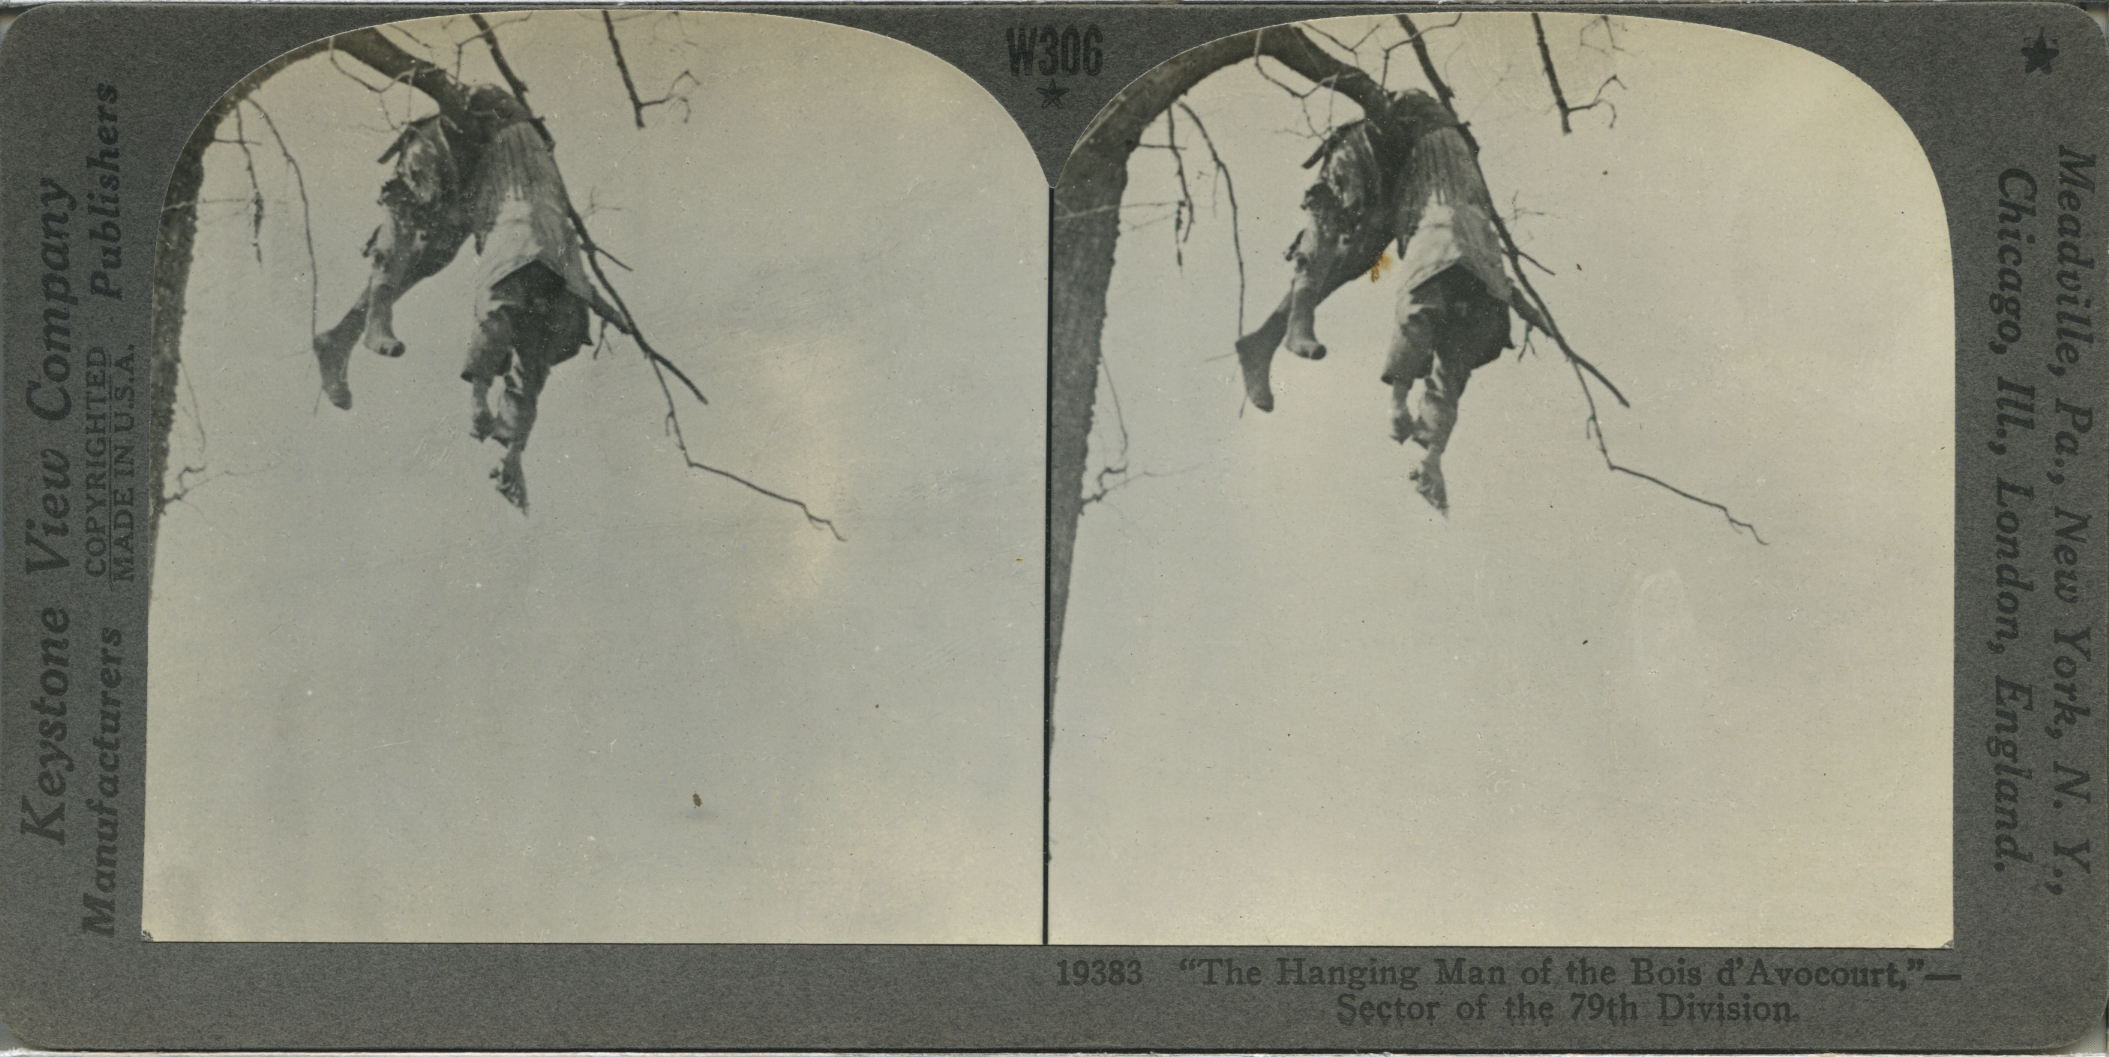 "The Hanging Man of the Bois d'Avocourt,"--Sector of the 79th Division